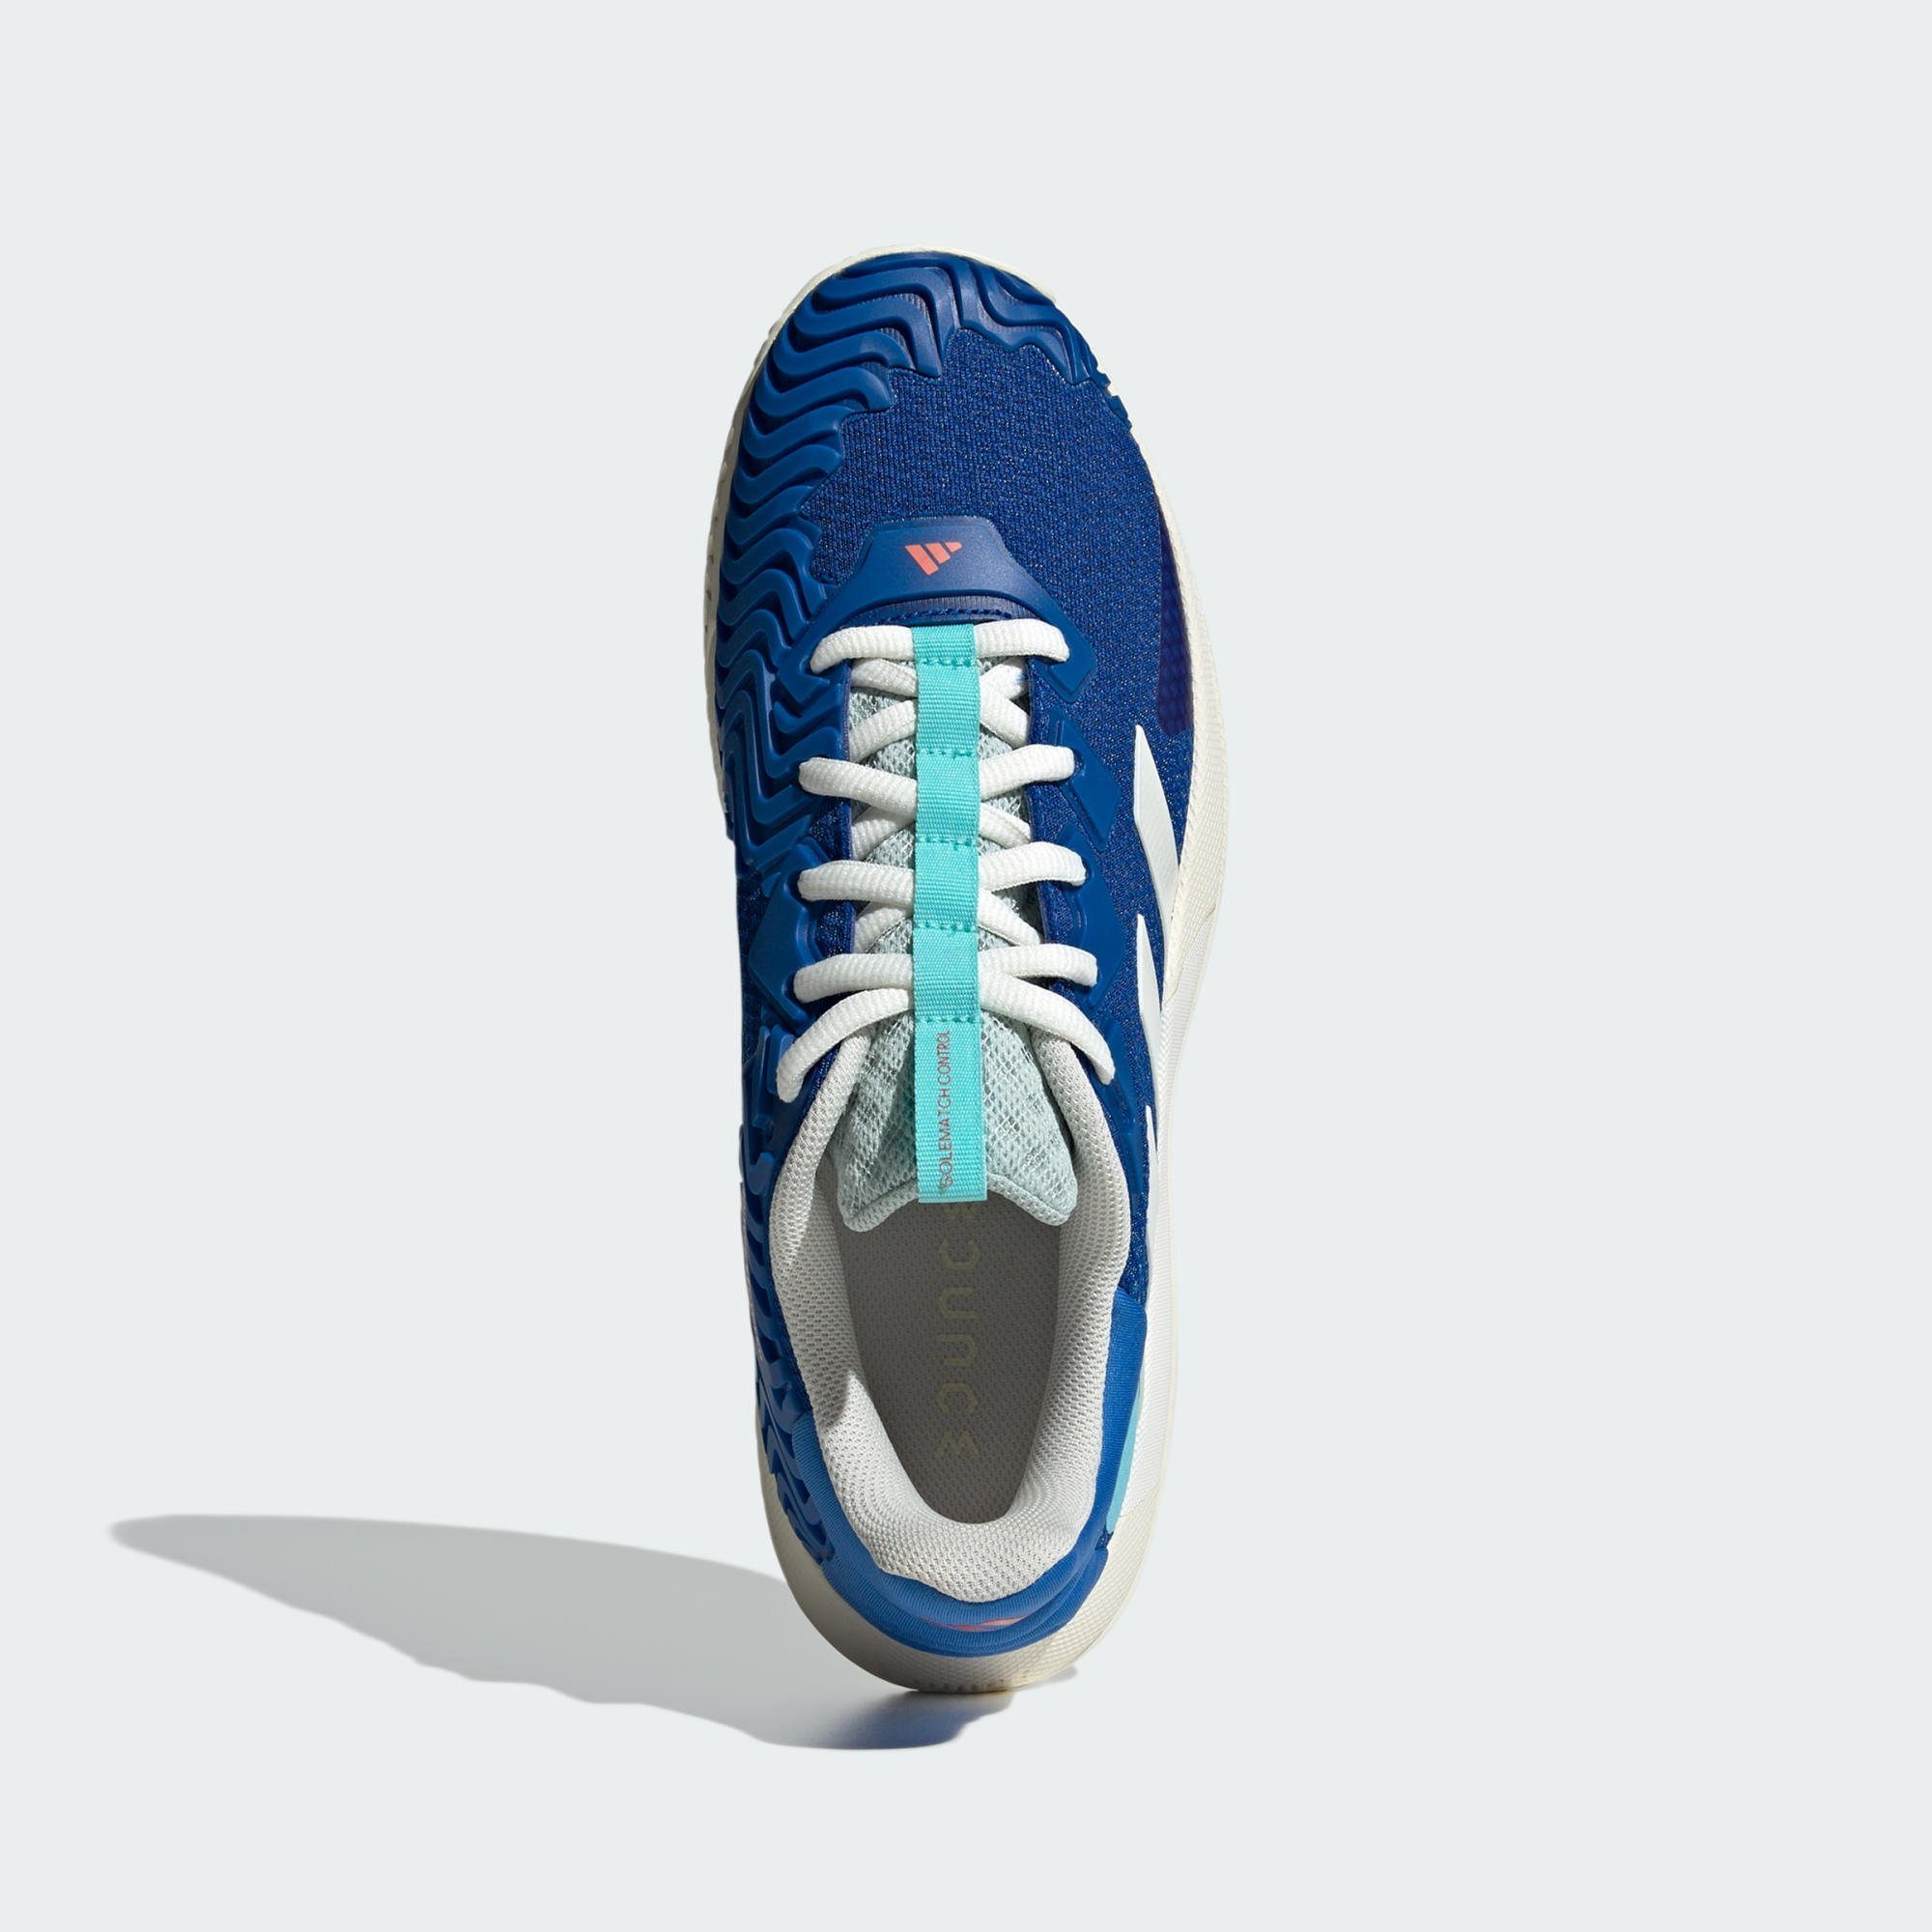 / Royal Royal Blue Off Indoorschuh TENNISSCHUH Bright White / Performance adidas SOLEMATCH CONTROL